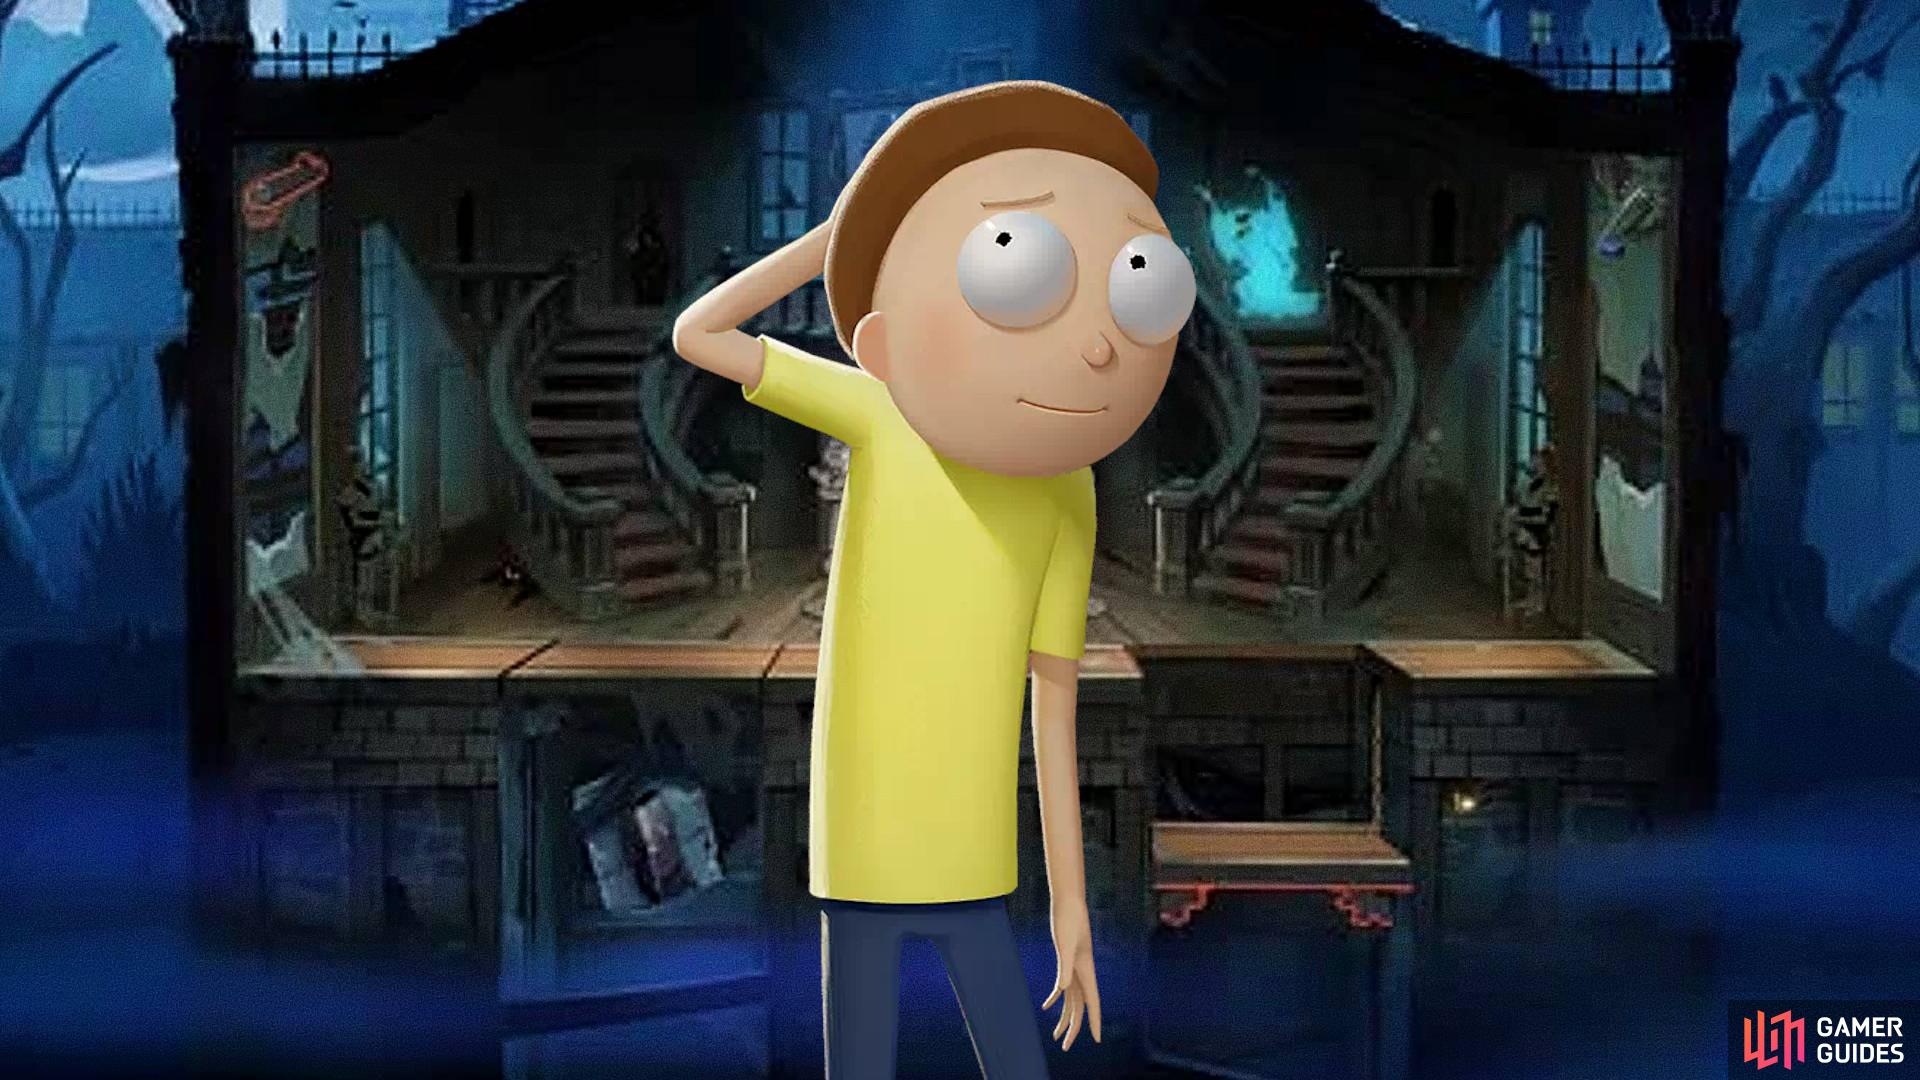 Here is a look at the best Morty perks in Multiversus.